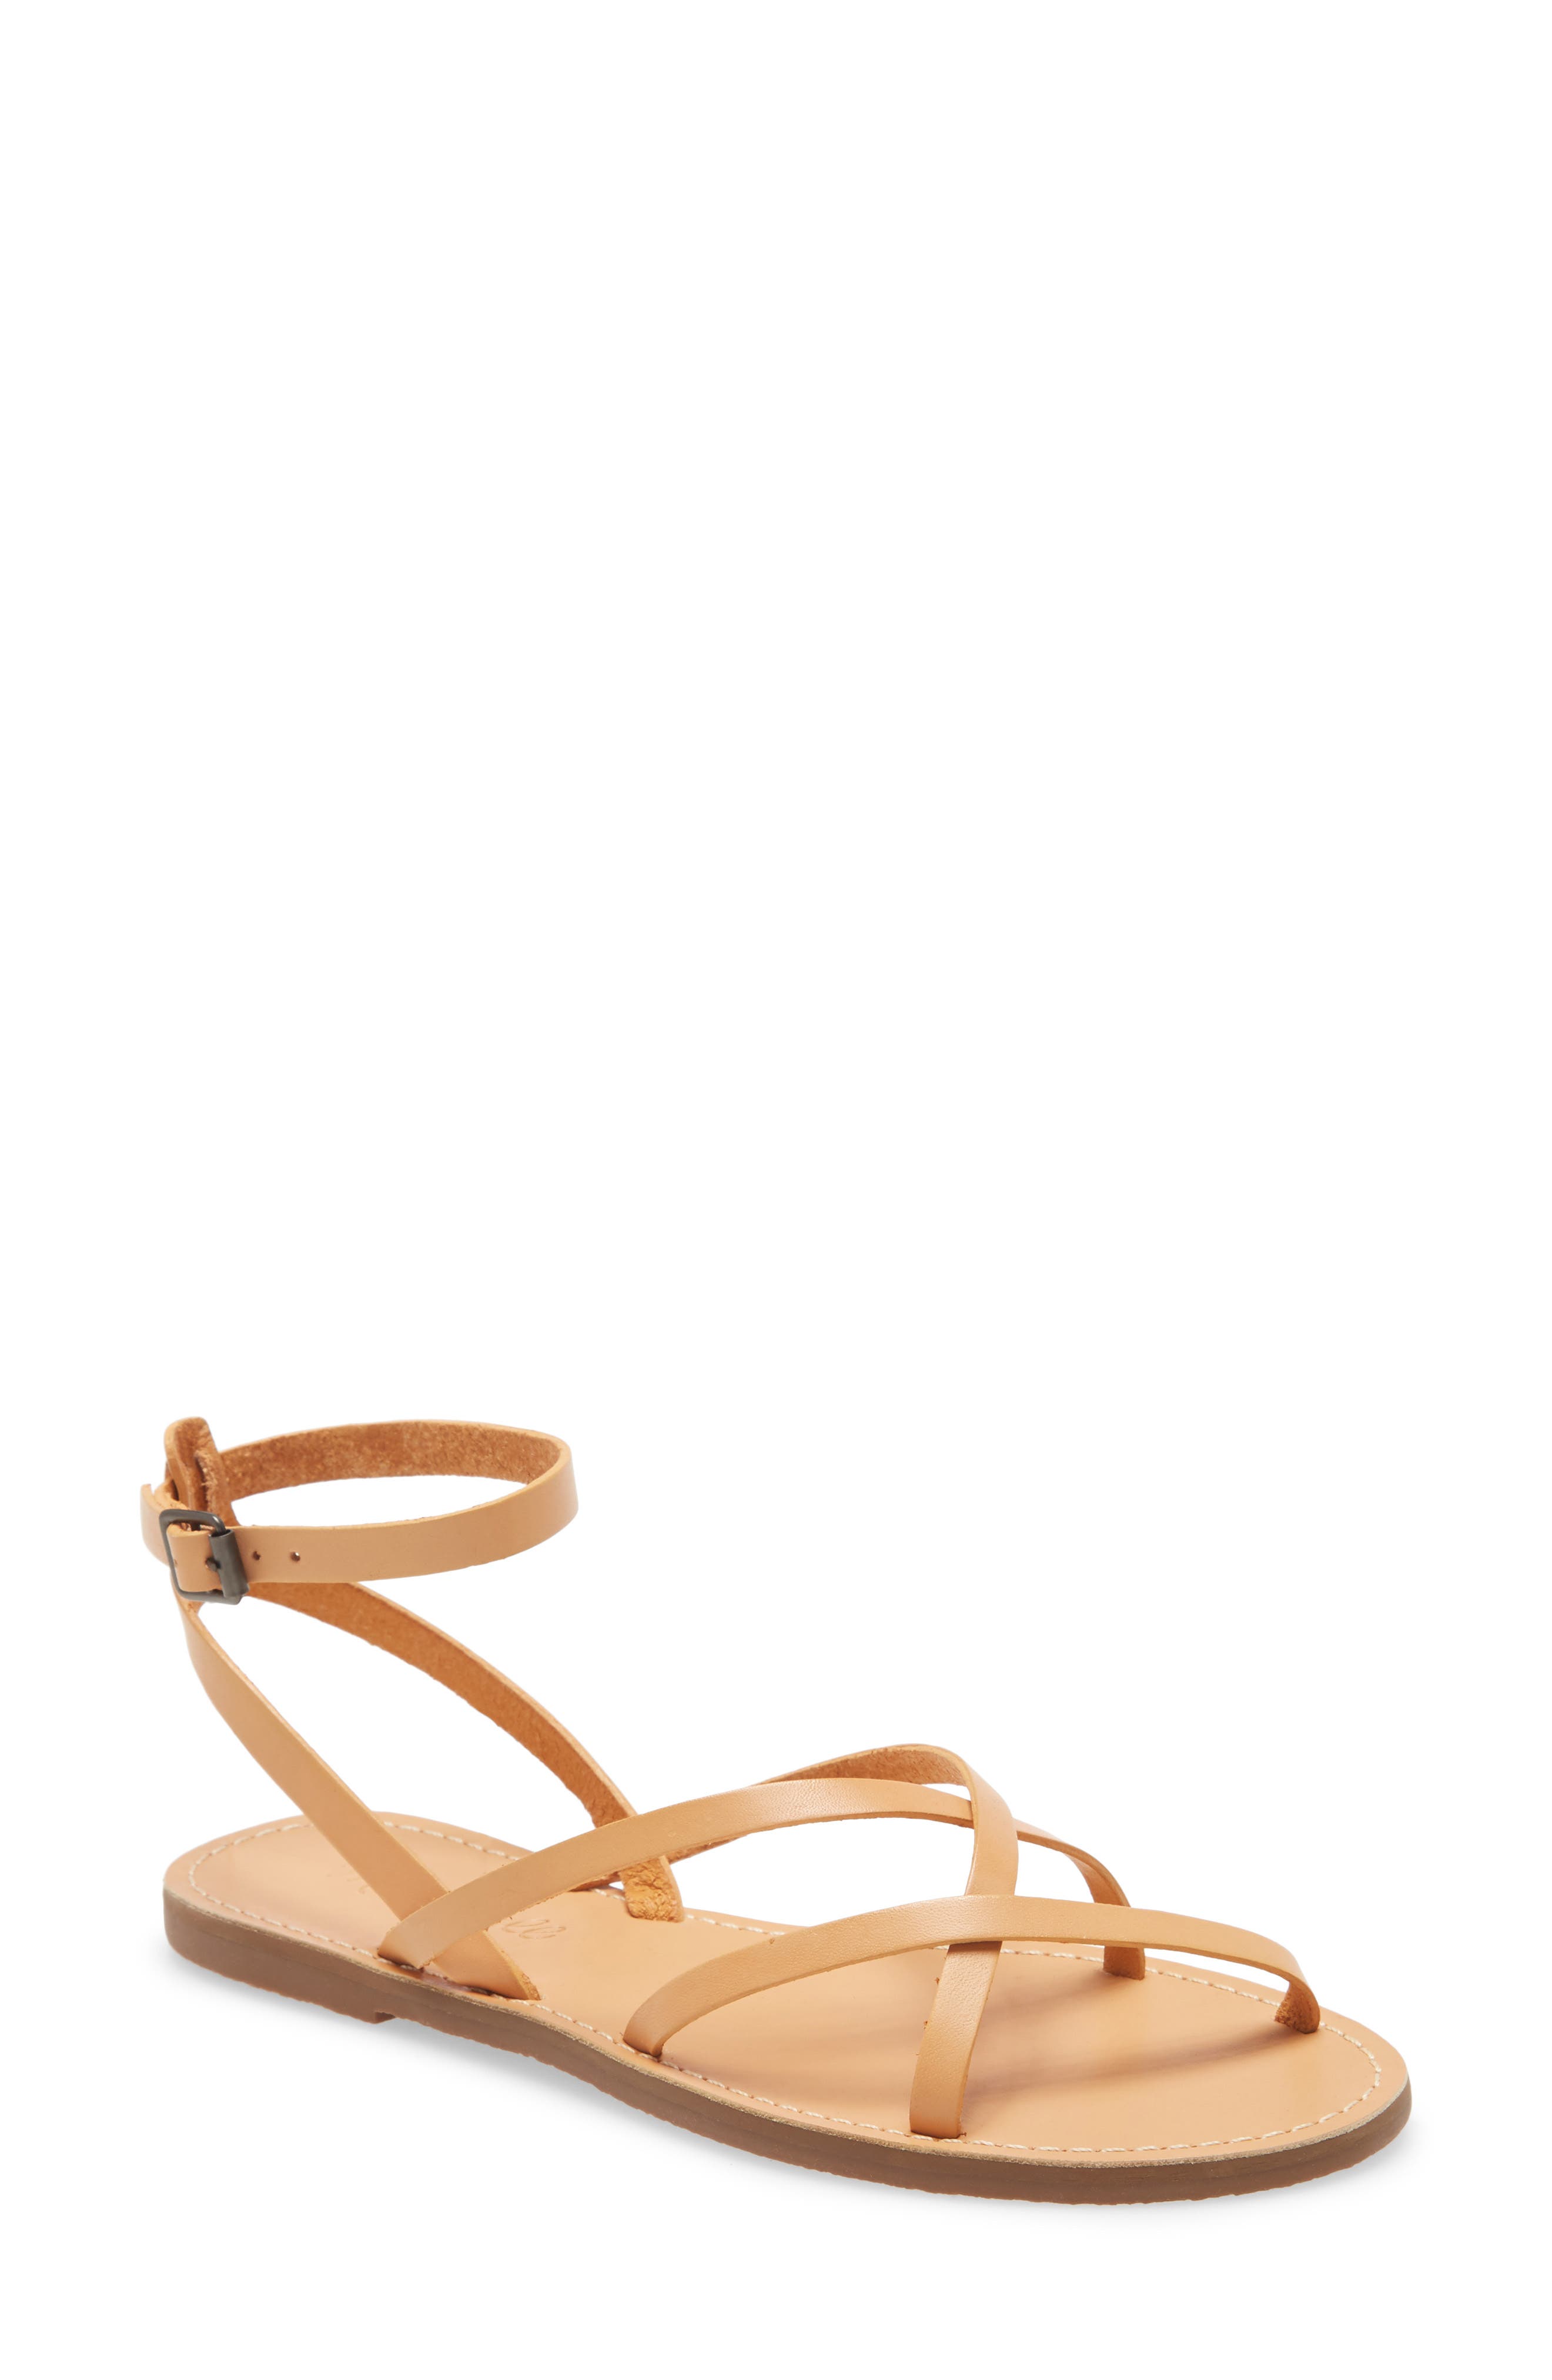 wildcraft strappy slingback flat sandals